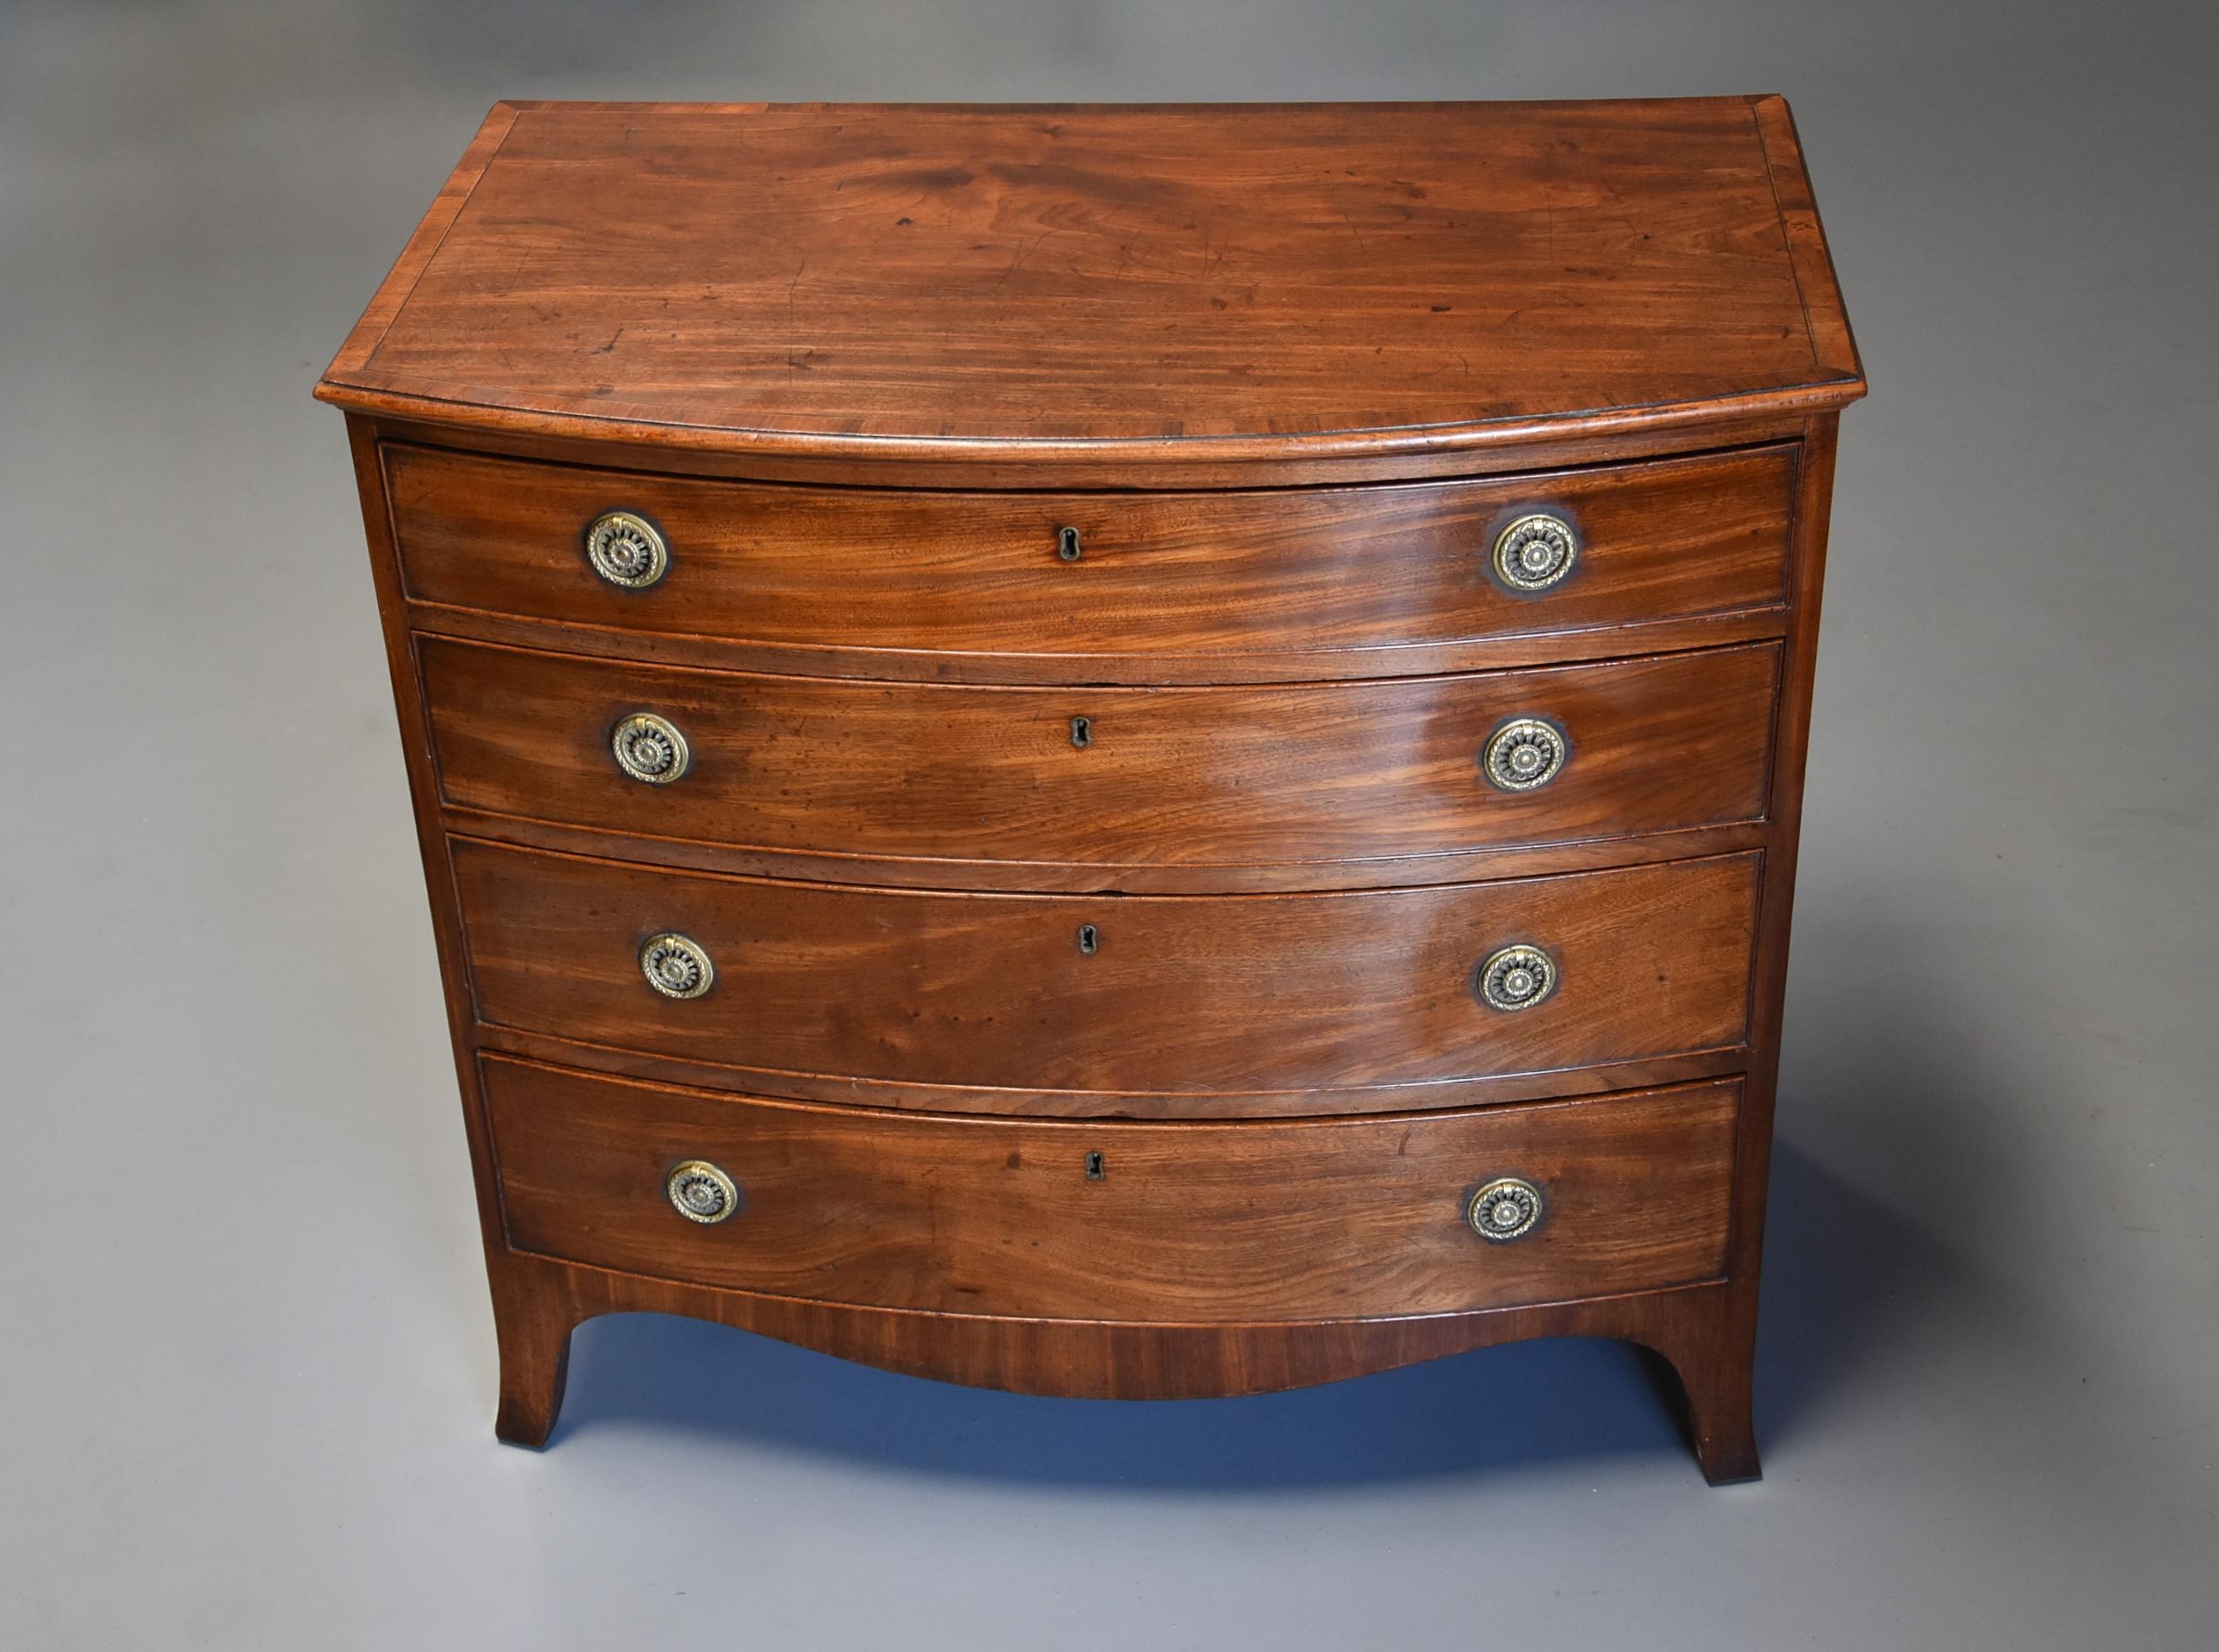 This chest of drawers consists of a finely figured mahogany top with mahogany and boxwood stringing with an outer rosewood banding and molded edge.

This leads down to four mahogany graduated cockbeaded drawers, all oak lined, with fine quality